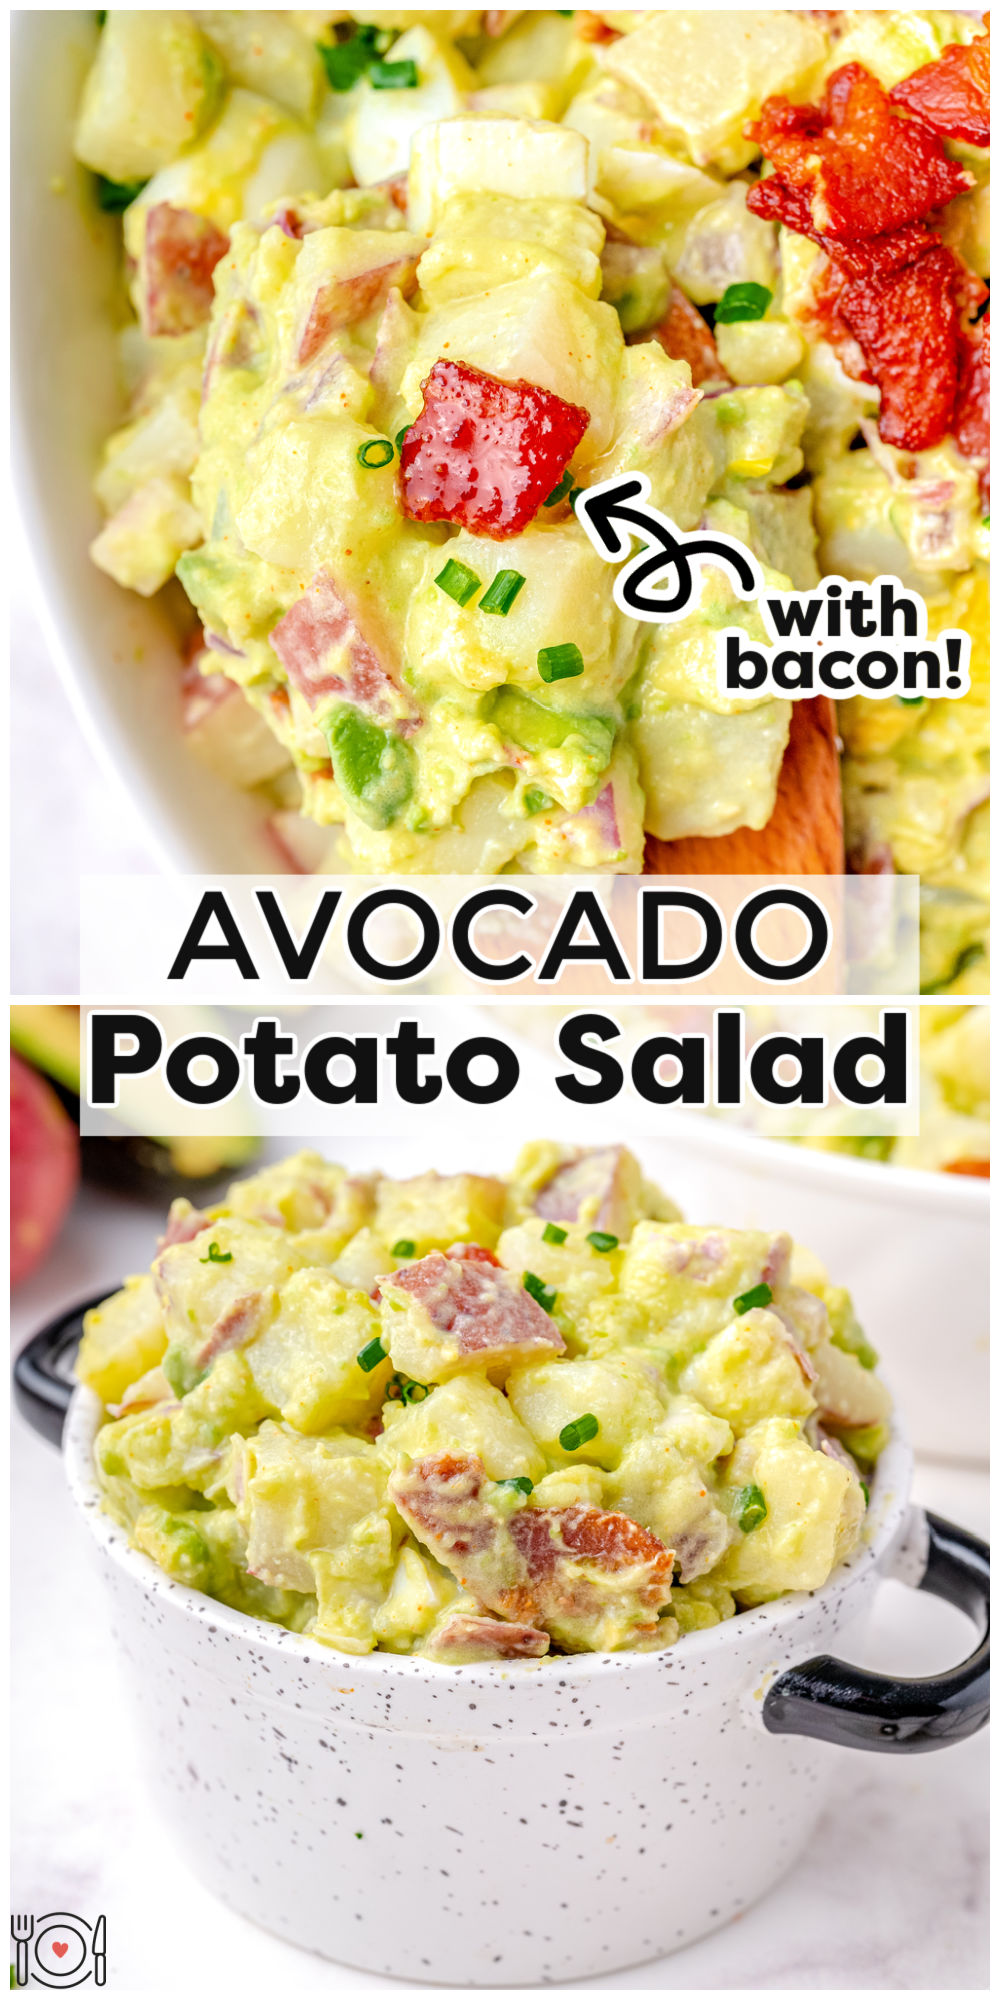 Avocado Potato Salad is a new take on potato salad. Ditch the mayo, replace it with avocado, and top with lots of crispy bacon! via @foodfolksandfun